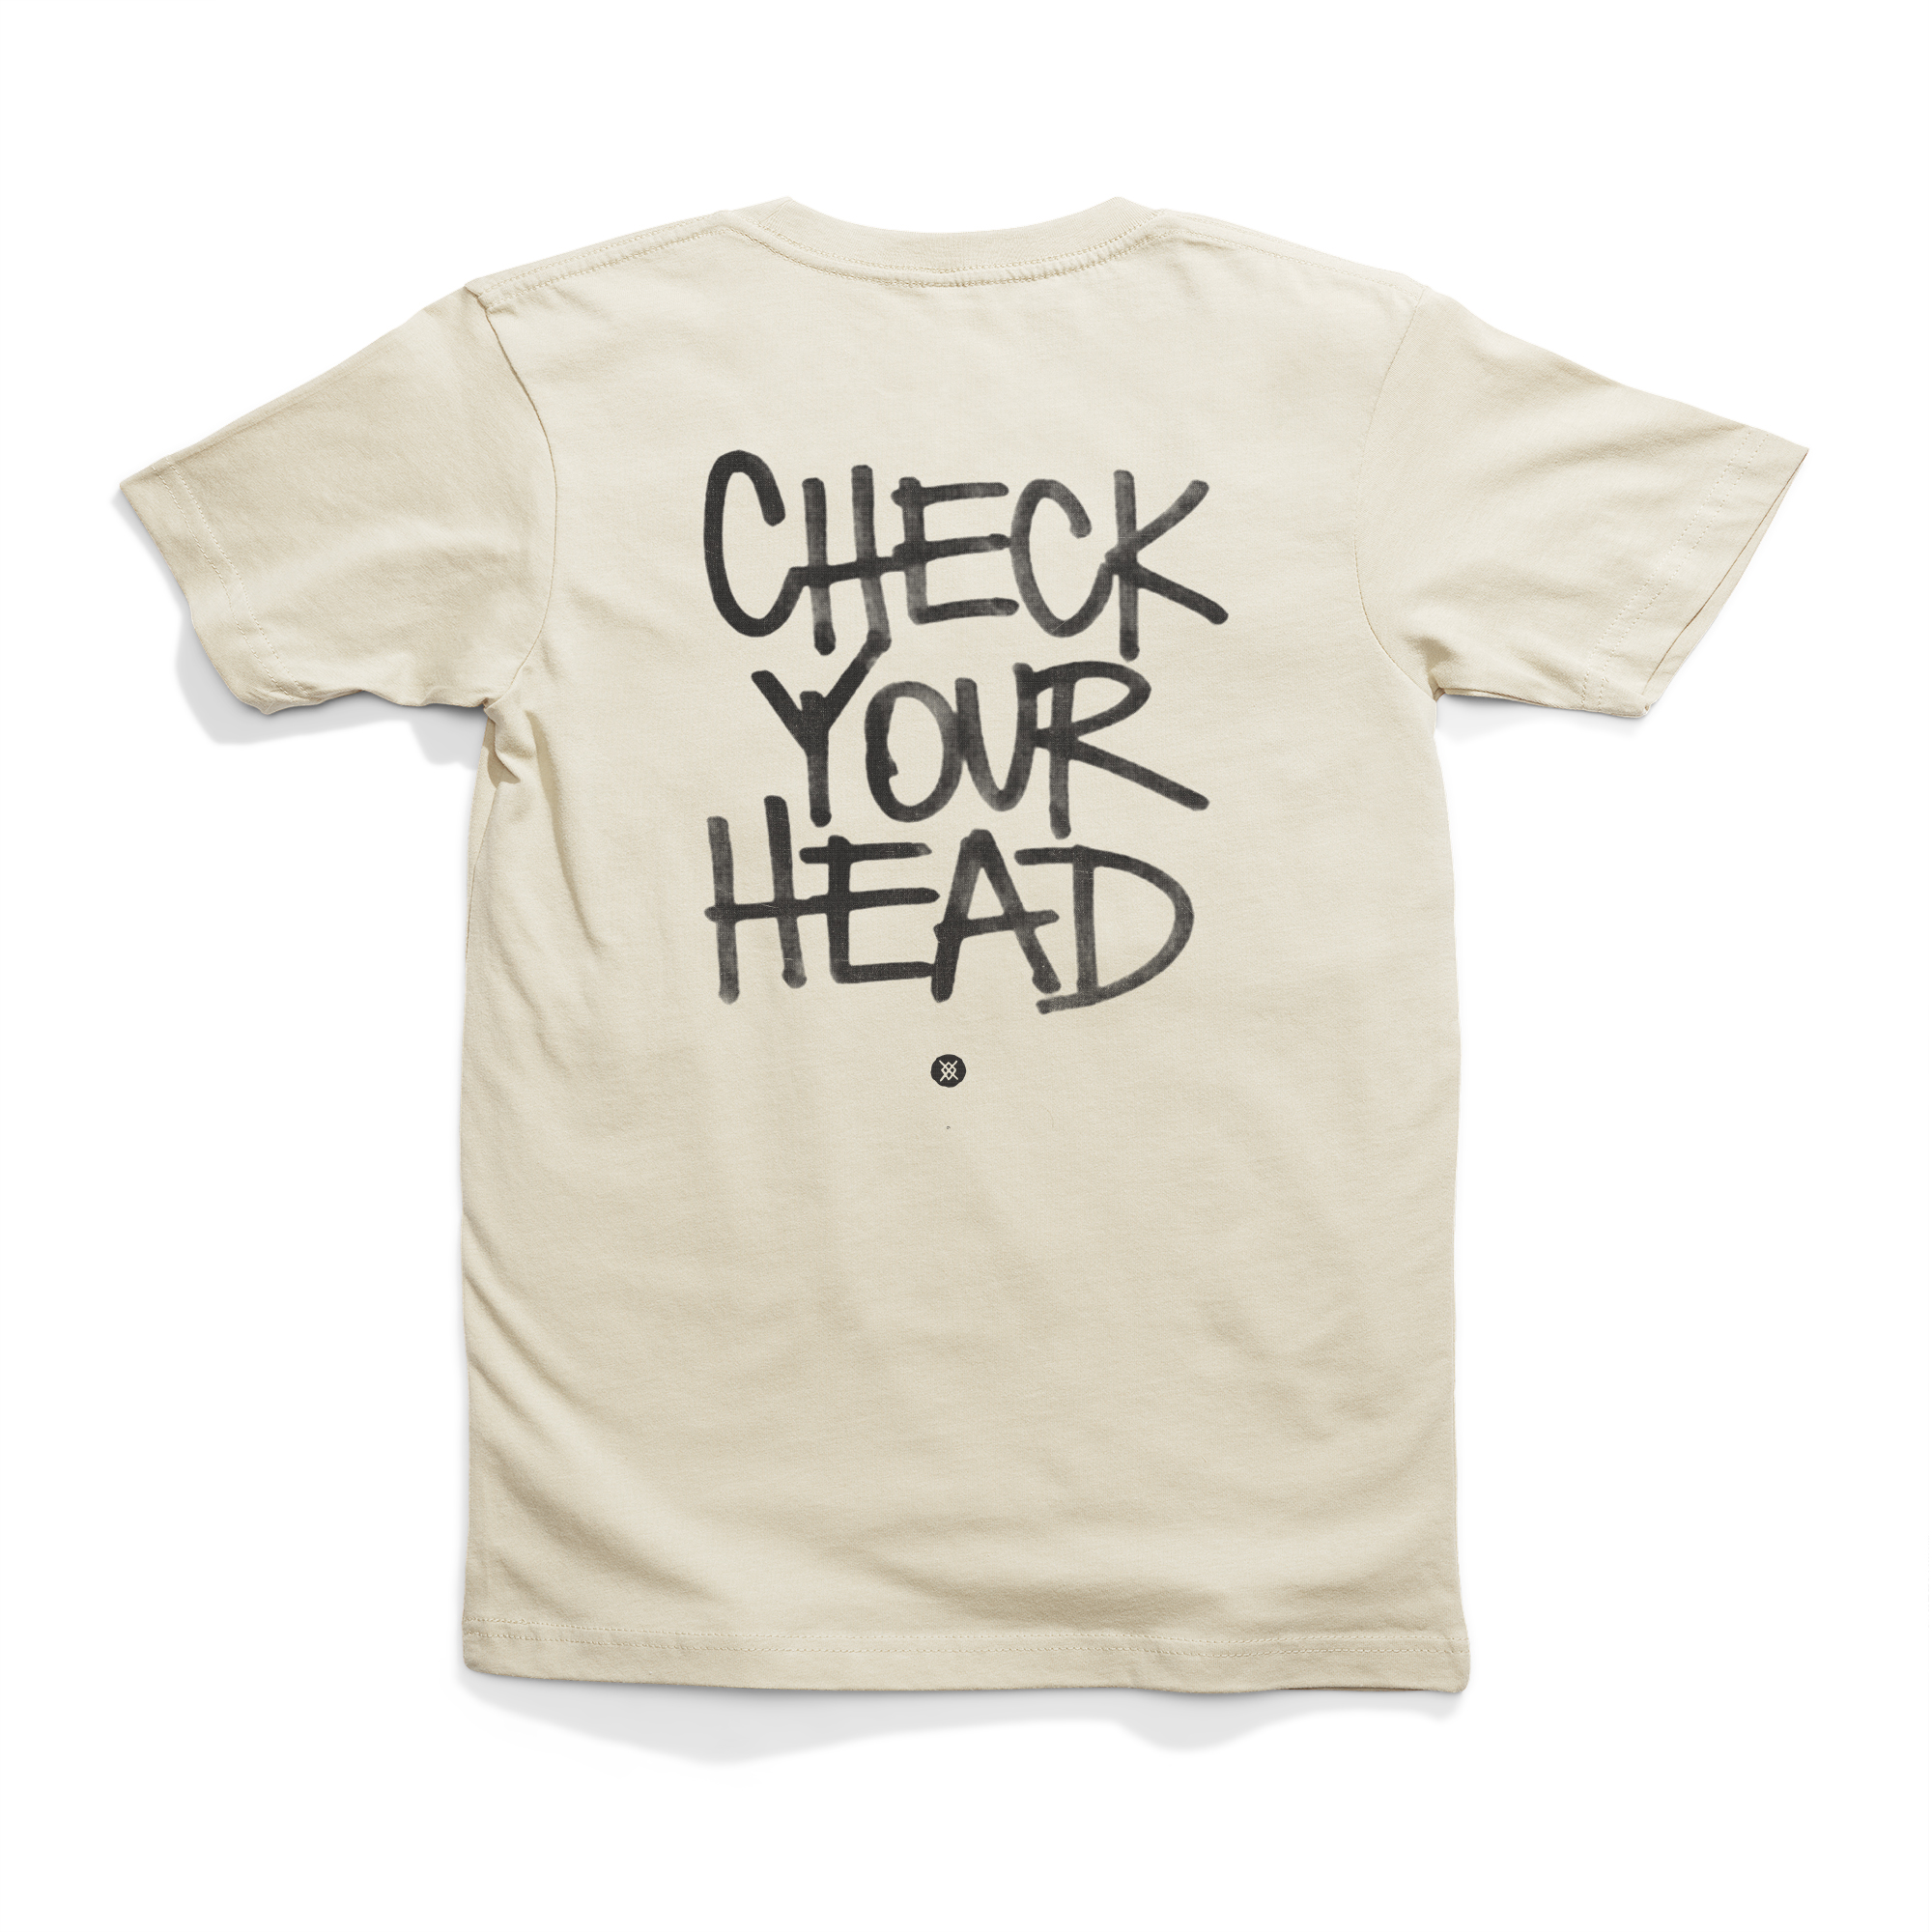 Beastie Boys X Stance Check Your Head 30 Years T-Shirt